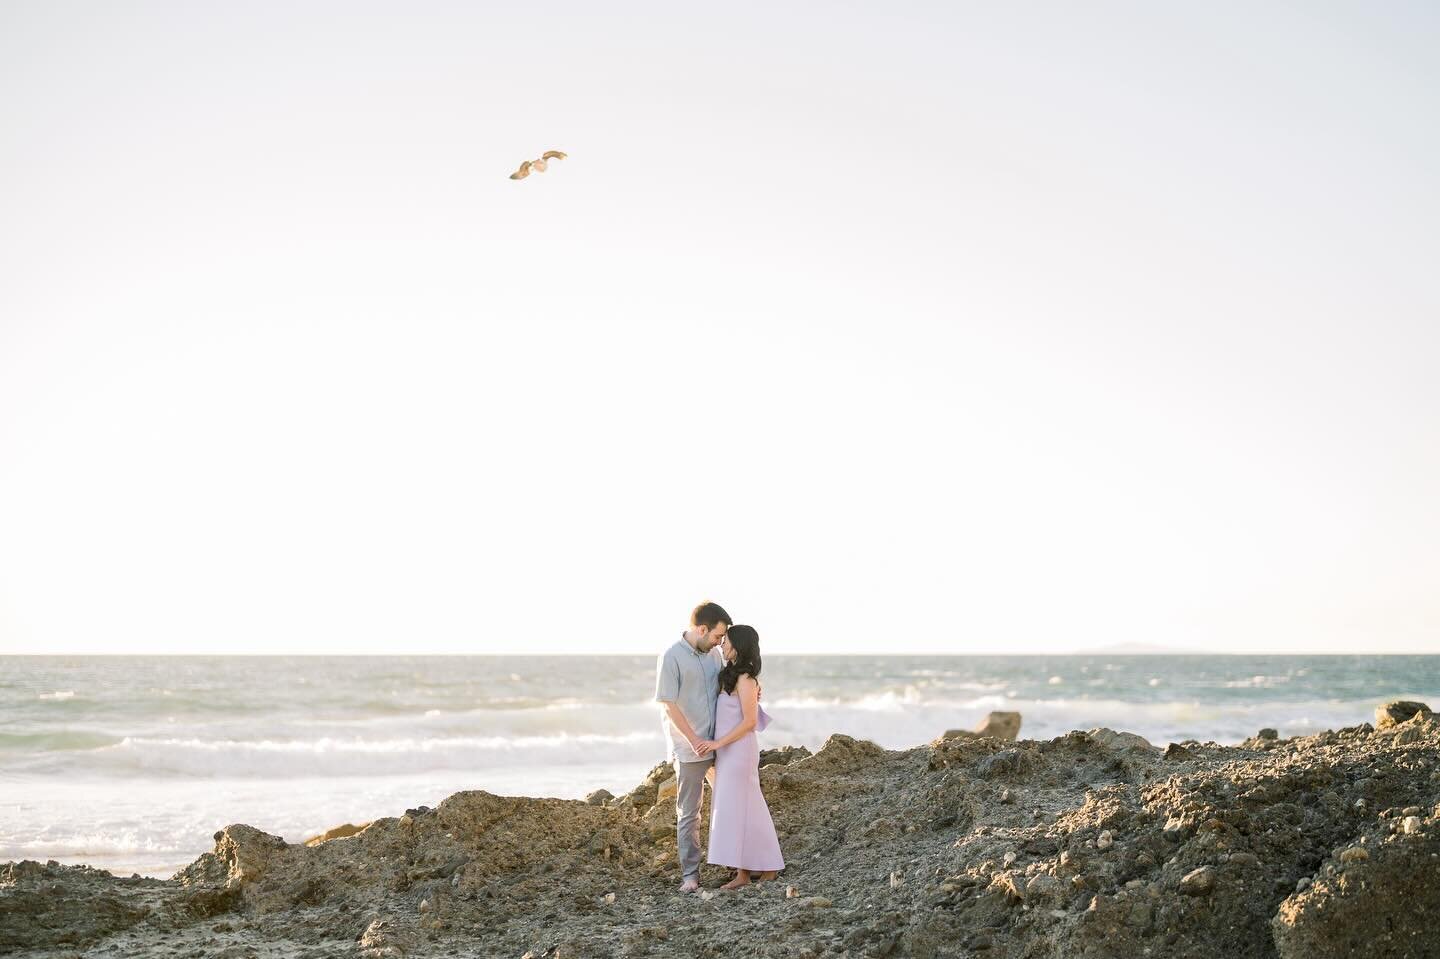 &ldquo;Love is like the wind&hellip;you can&rsquo;t see it but you can feel it&rdquo;
~ Nicholas Sparks

There was no shortage of love, laughs AND wind for K+M&rsquo;s stunning beach engagement session! It was a chilly afternoon but they were such pr